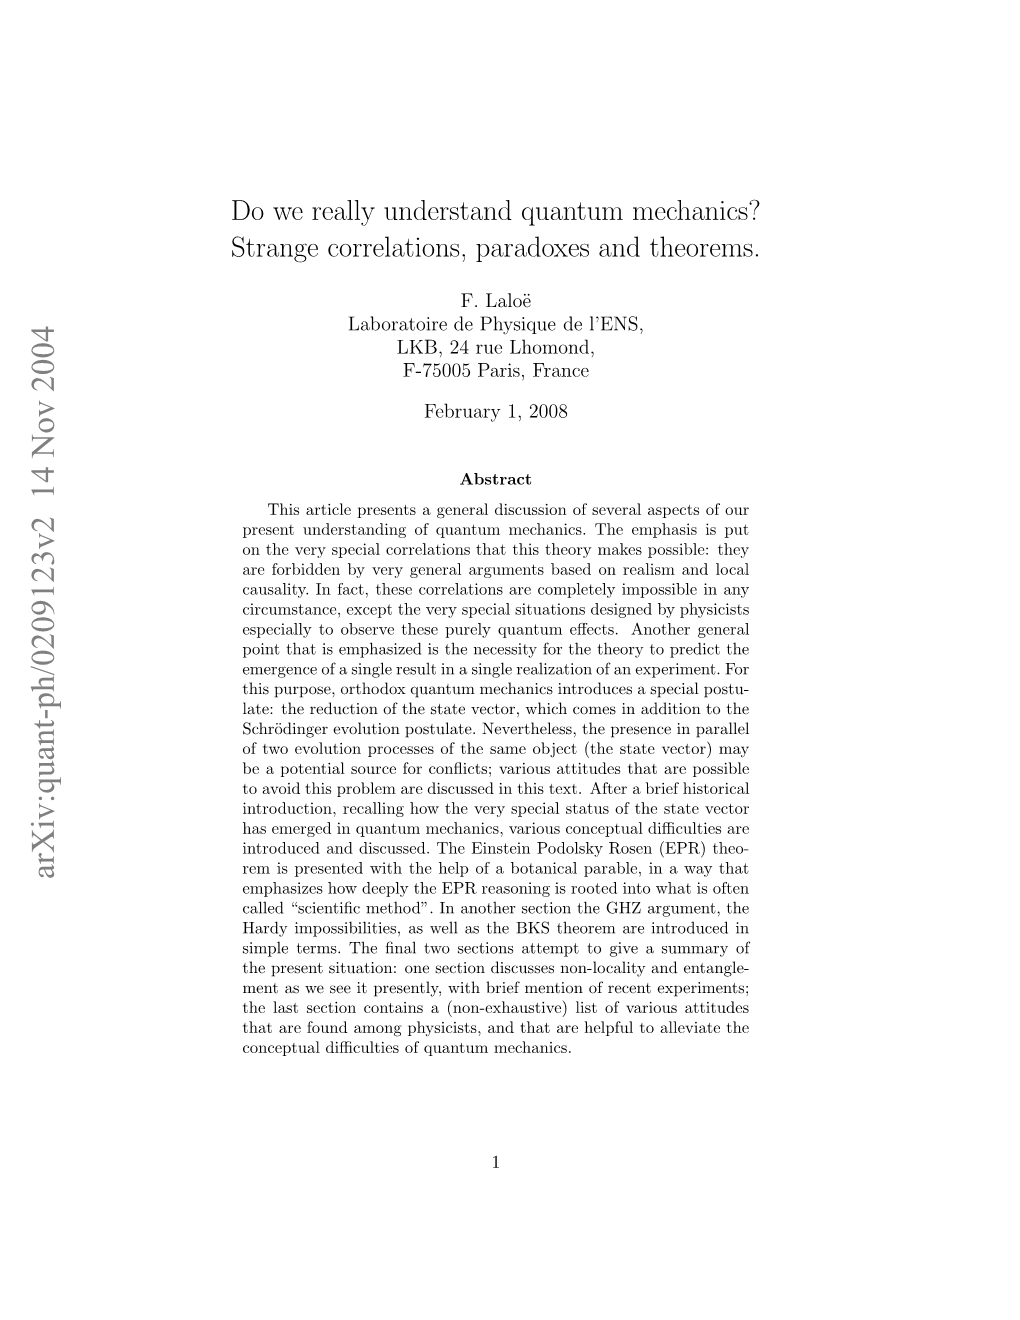 Do We Really Understand Quantum Mechanics? Strange Correlations, Paradoxes and Theorems